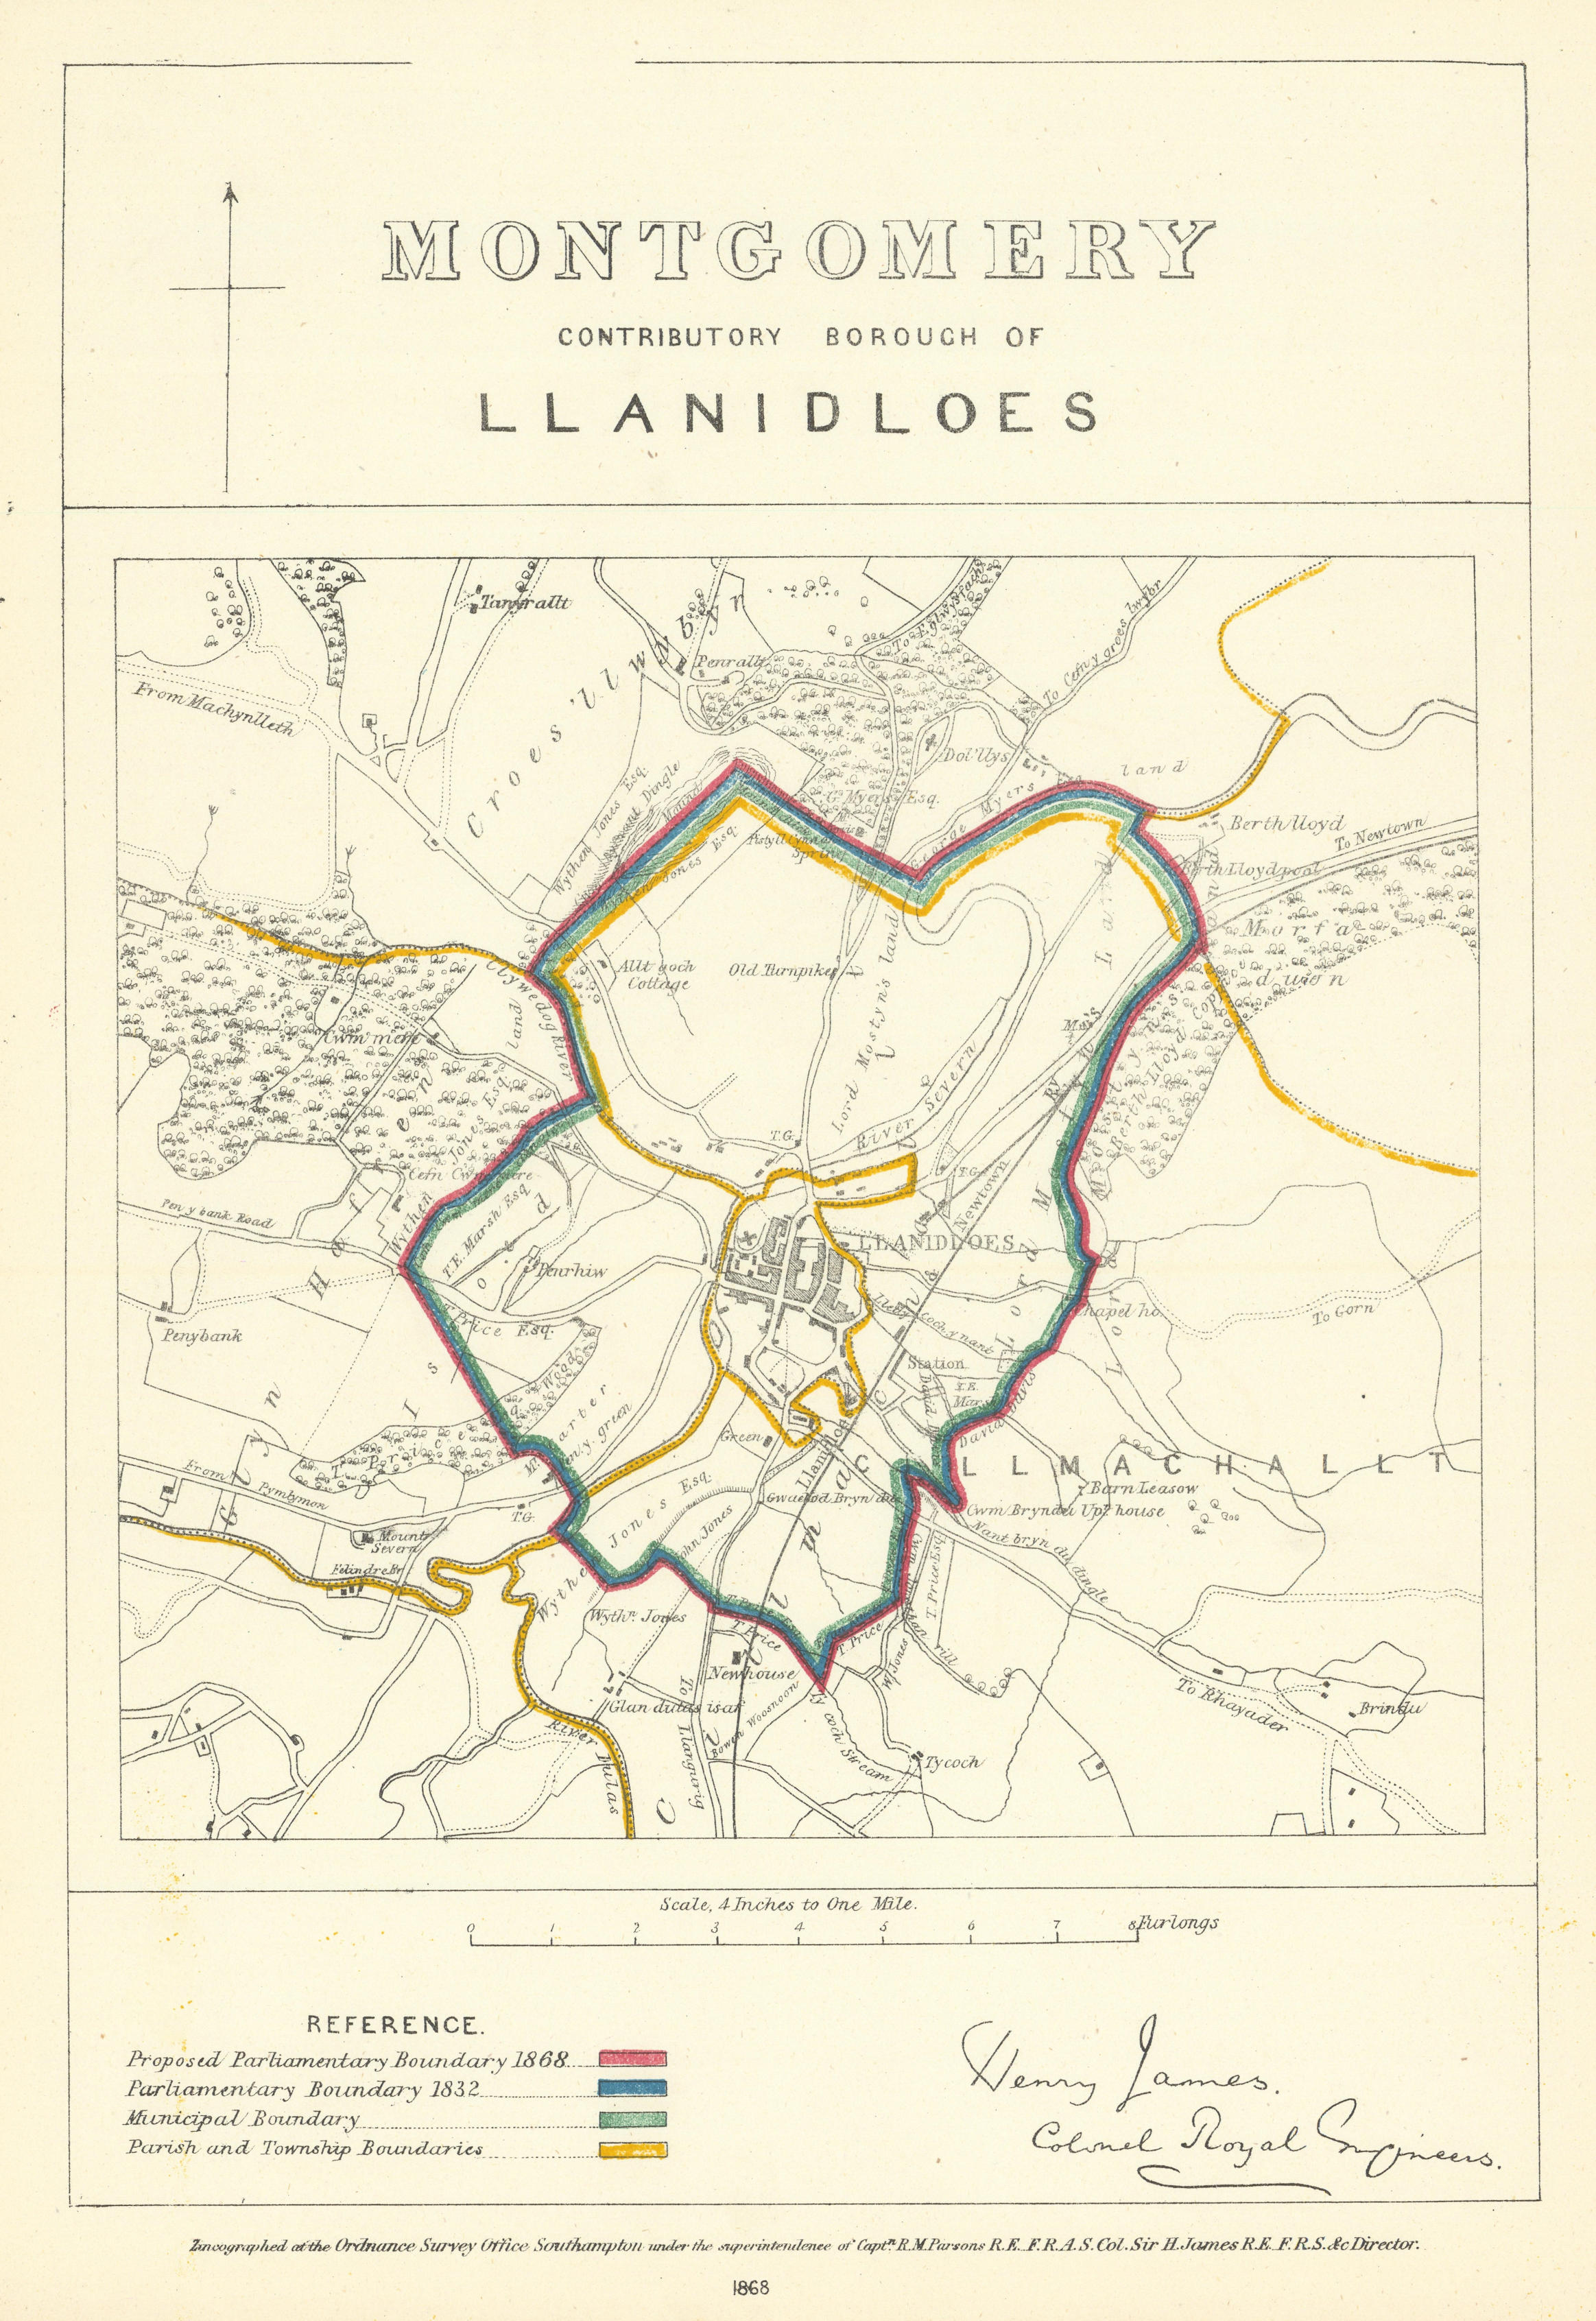 Associate Product Montgomery Contrib'y Borough of Llanidloes. JAMES. Boundary Commission 1868 map